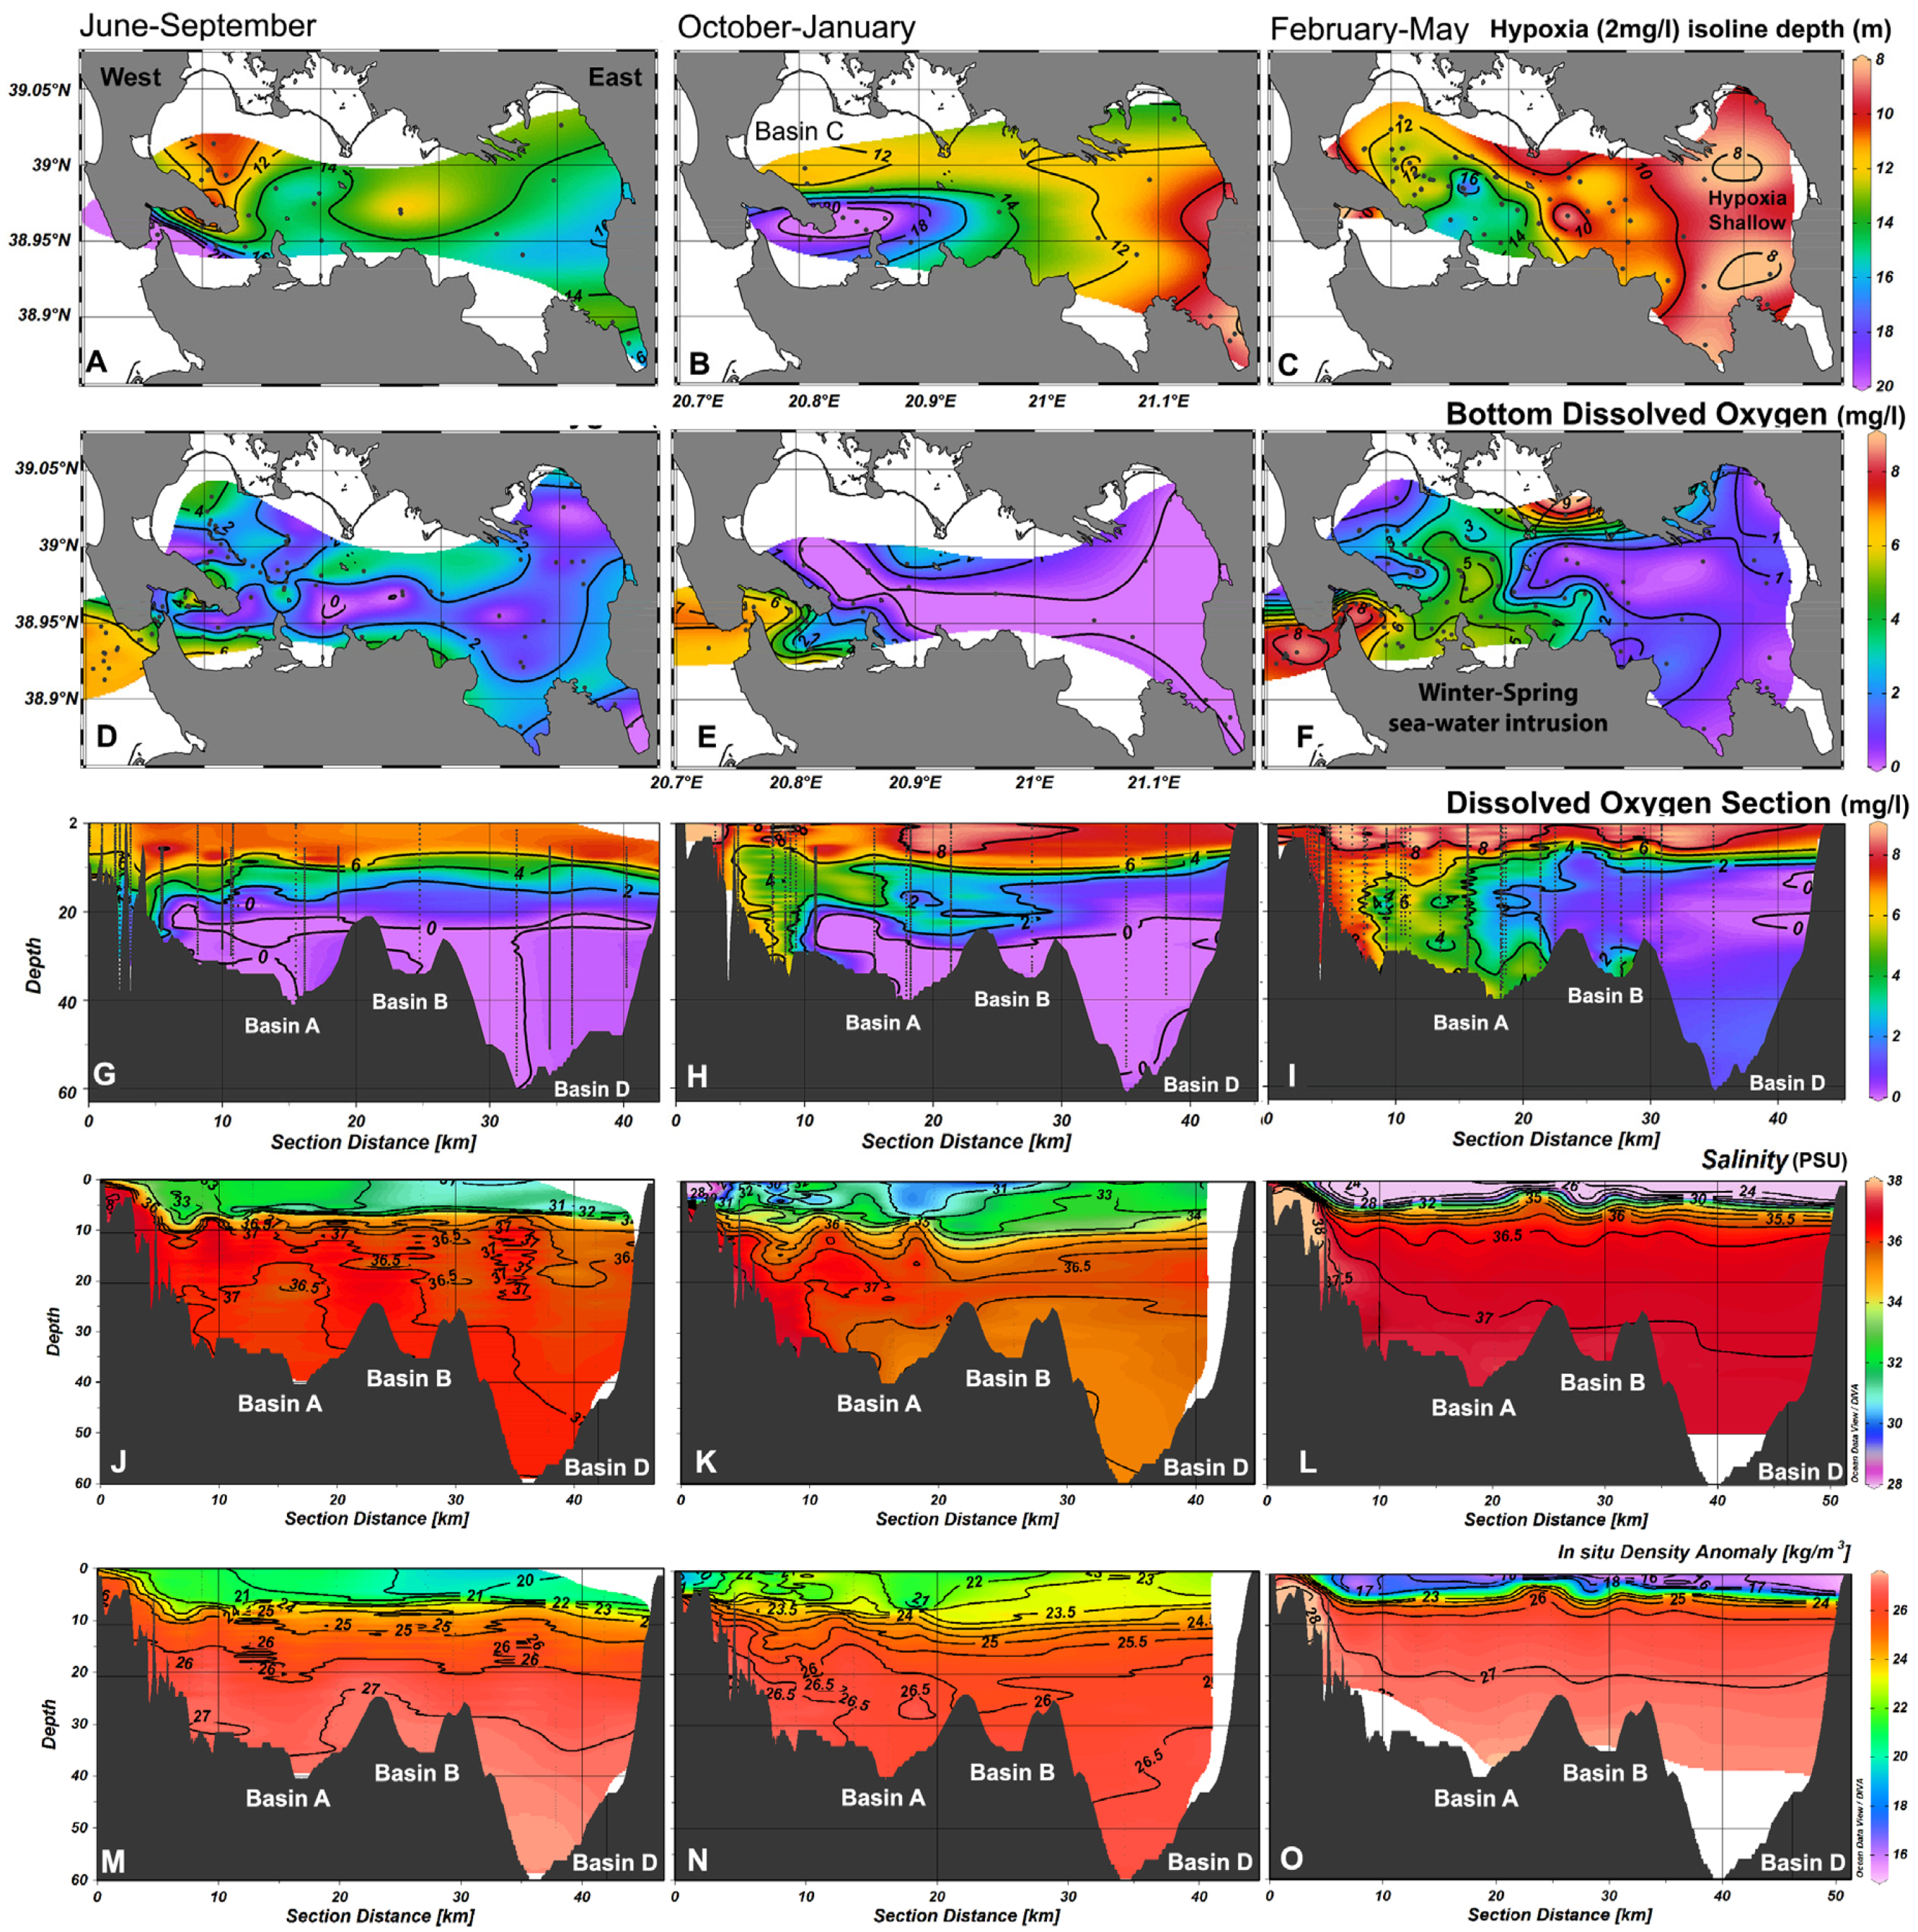 Geosciences | Free Full-Text | Spatio-Seasonal Hypoxia/Anoxia Dynamics and  Sill Circulation Patterns Linked to Natural Ventilation Drivers, in a  Mediterranean Landlocked Embayment: Amvrakikos Gulf, Greece | HTML